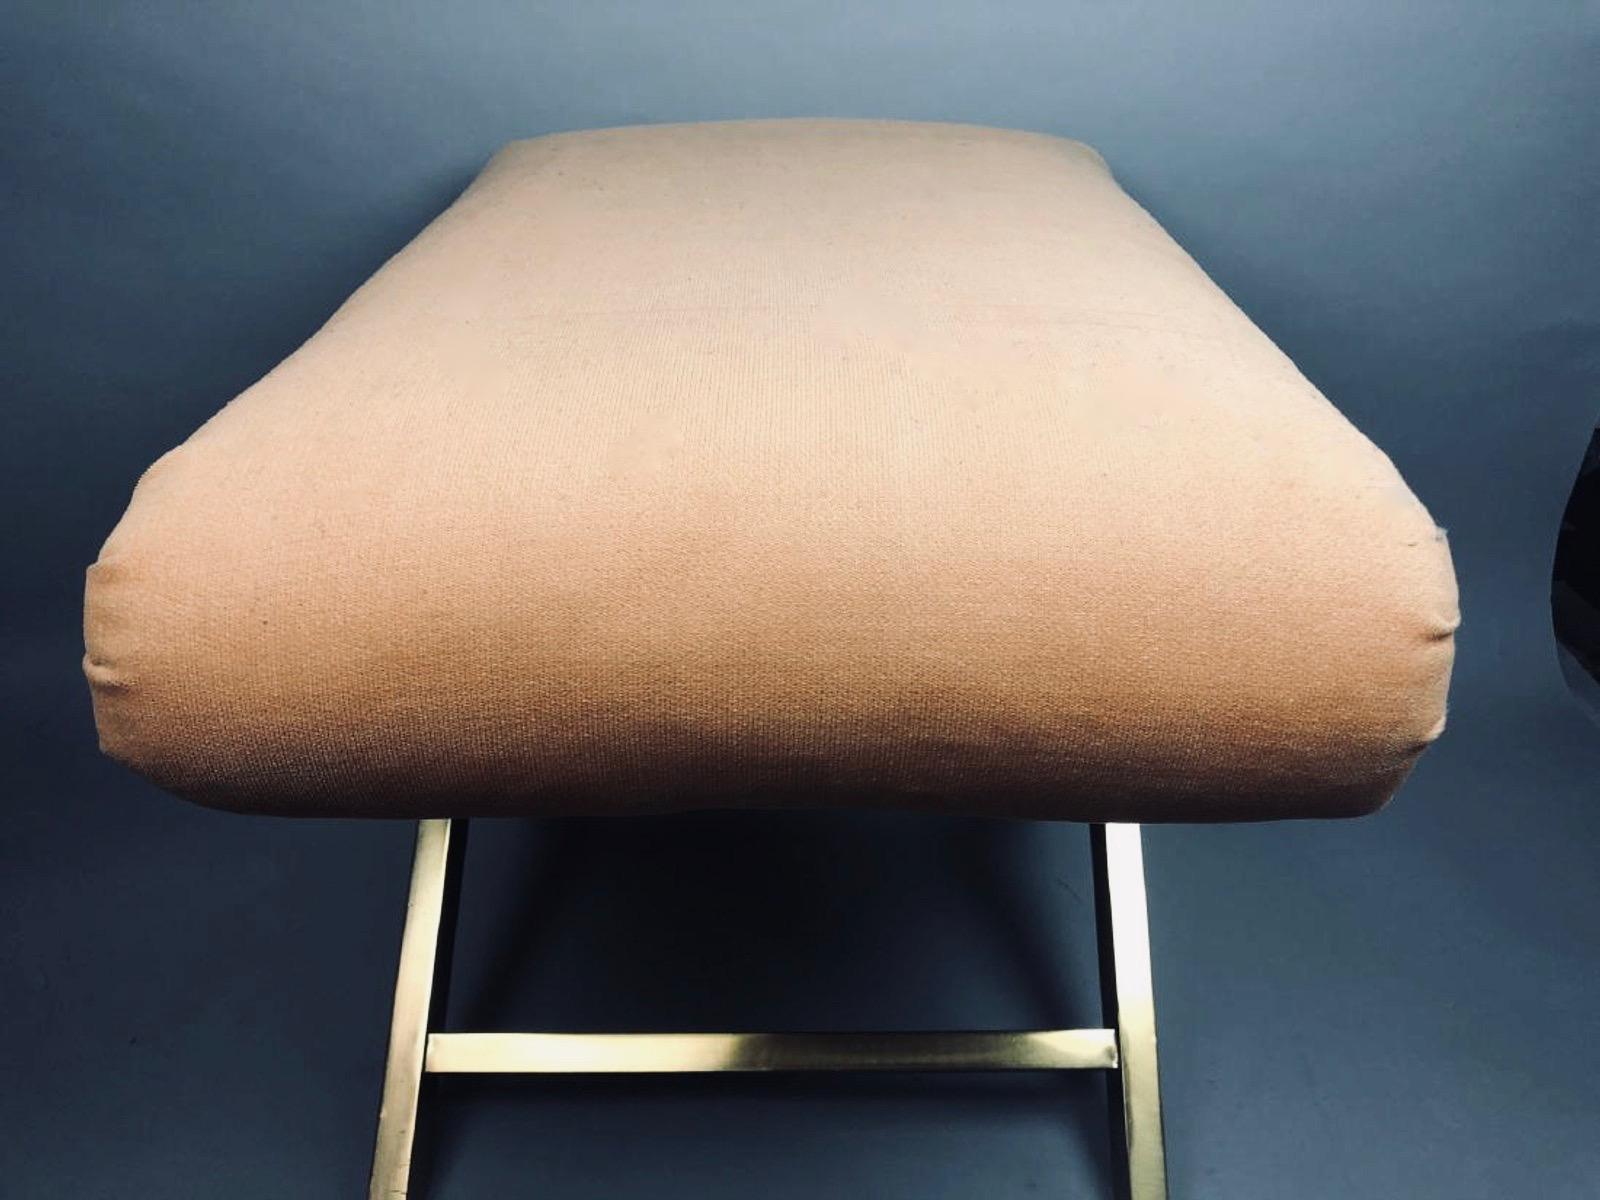 Weiman-Warren blush velvet & brass crossed-base ottoman, glamour stool, bench with Weiman label underneath. Original peachy blush velvet upholstered to perfection. Love the Neoclassical volute-like folds at each corner and the light absorbing, matte